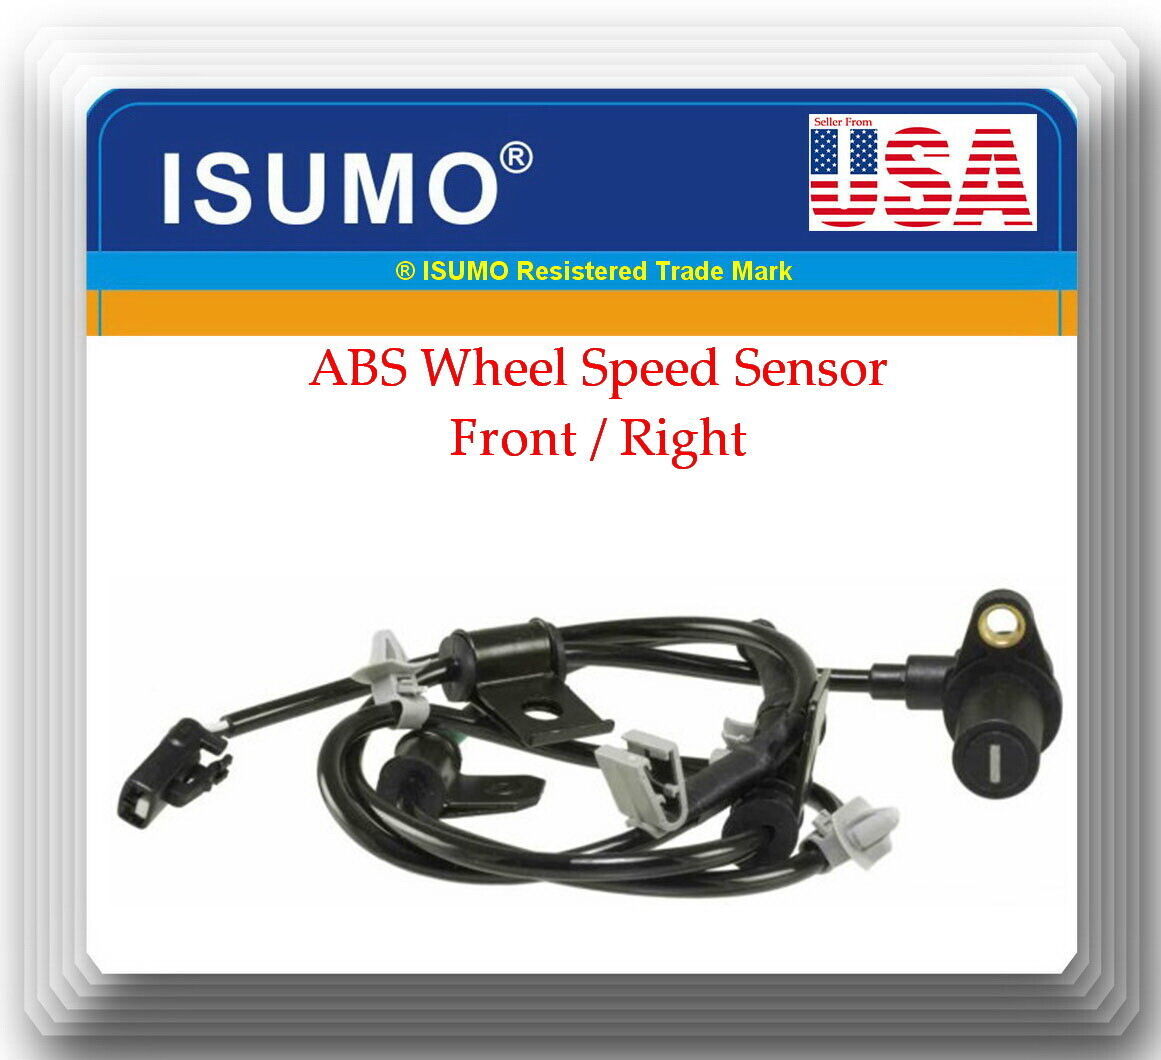 Primary image for 95670-2D150 ABS Speed Sensor Front Right Fits: Hyundai Elantra 2001- 2006